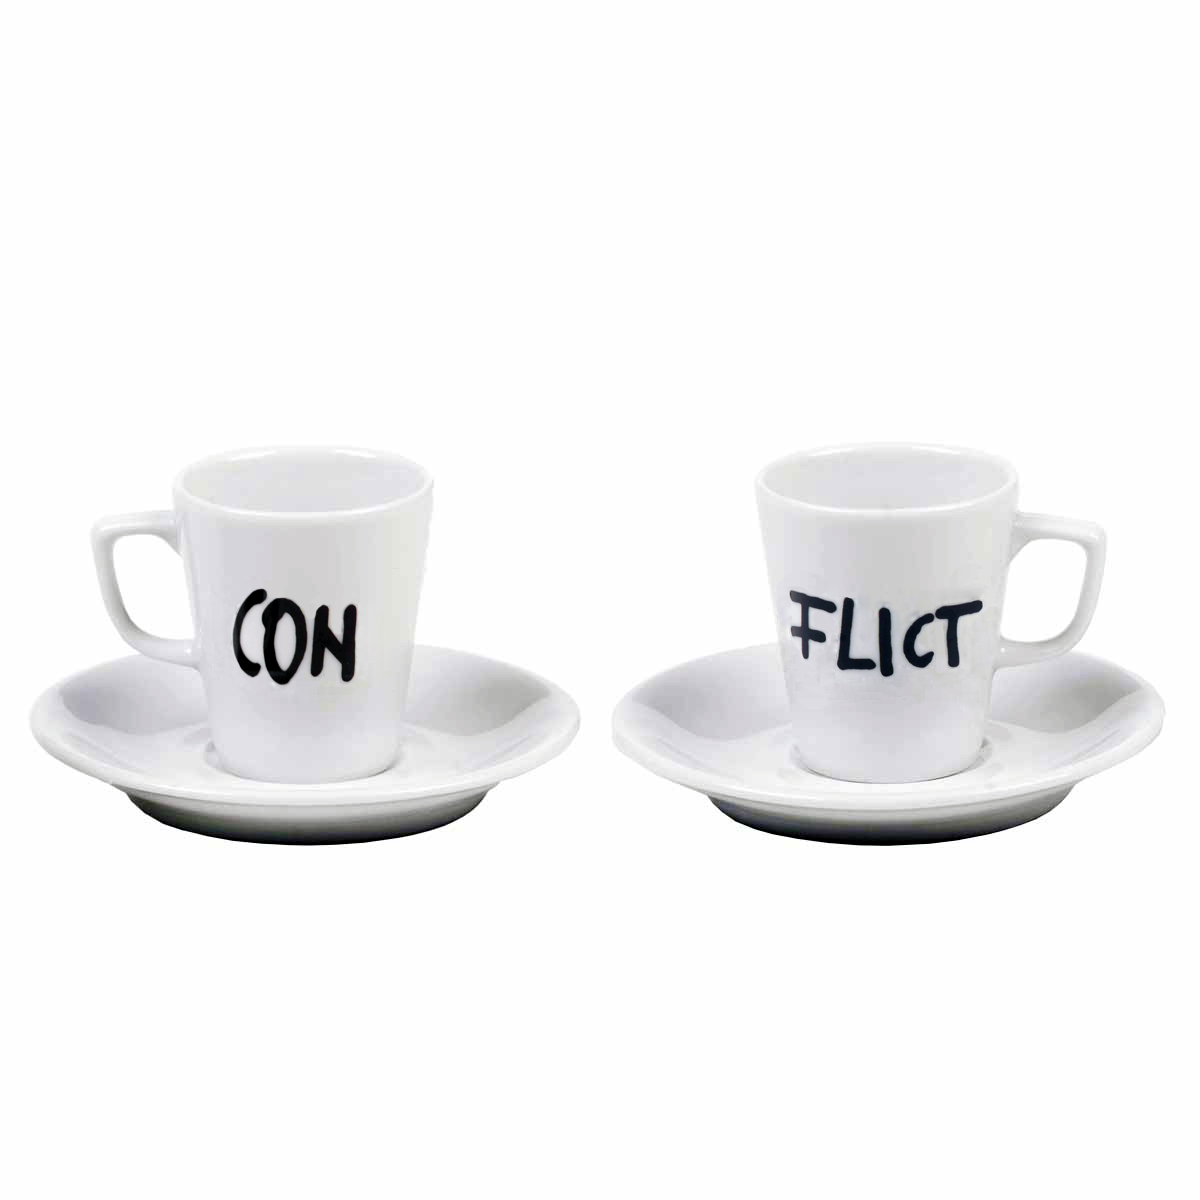 cups dialogues